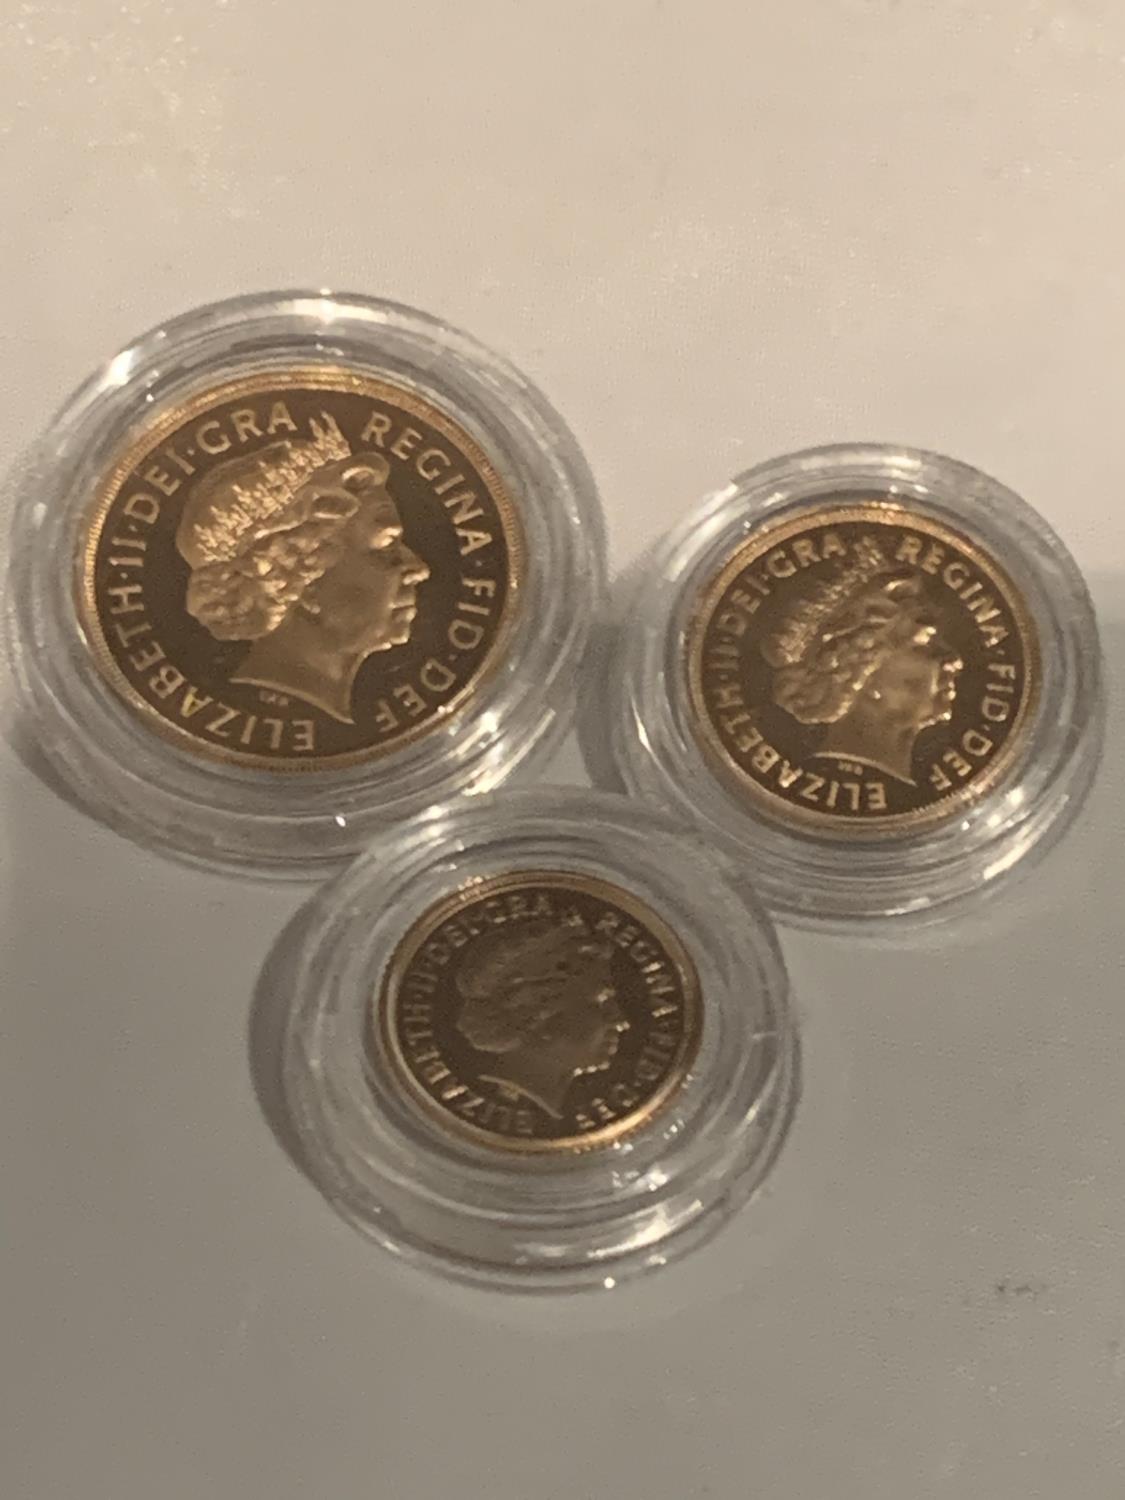 A 2008 THREE COIN GOLD PROOF SET, DOUBLE SOVEREIGN, SOVEREIGN AND HALF SOVEREIGN IN WOODEN - Image 3 of 4